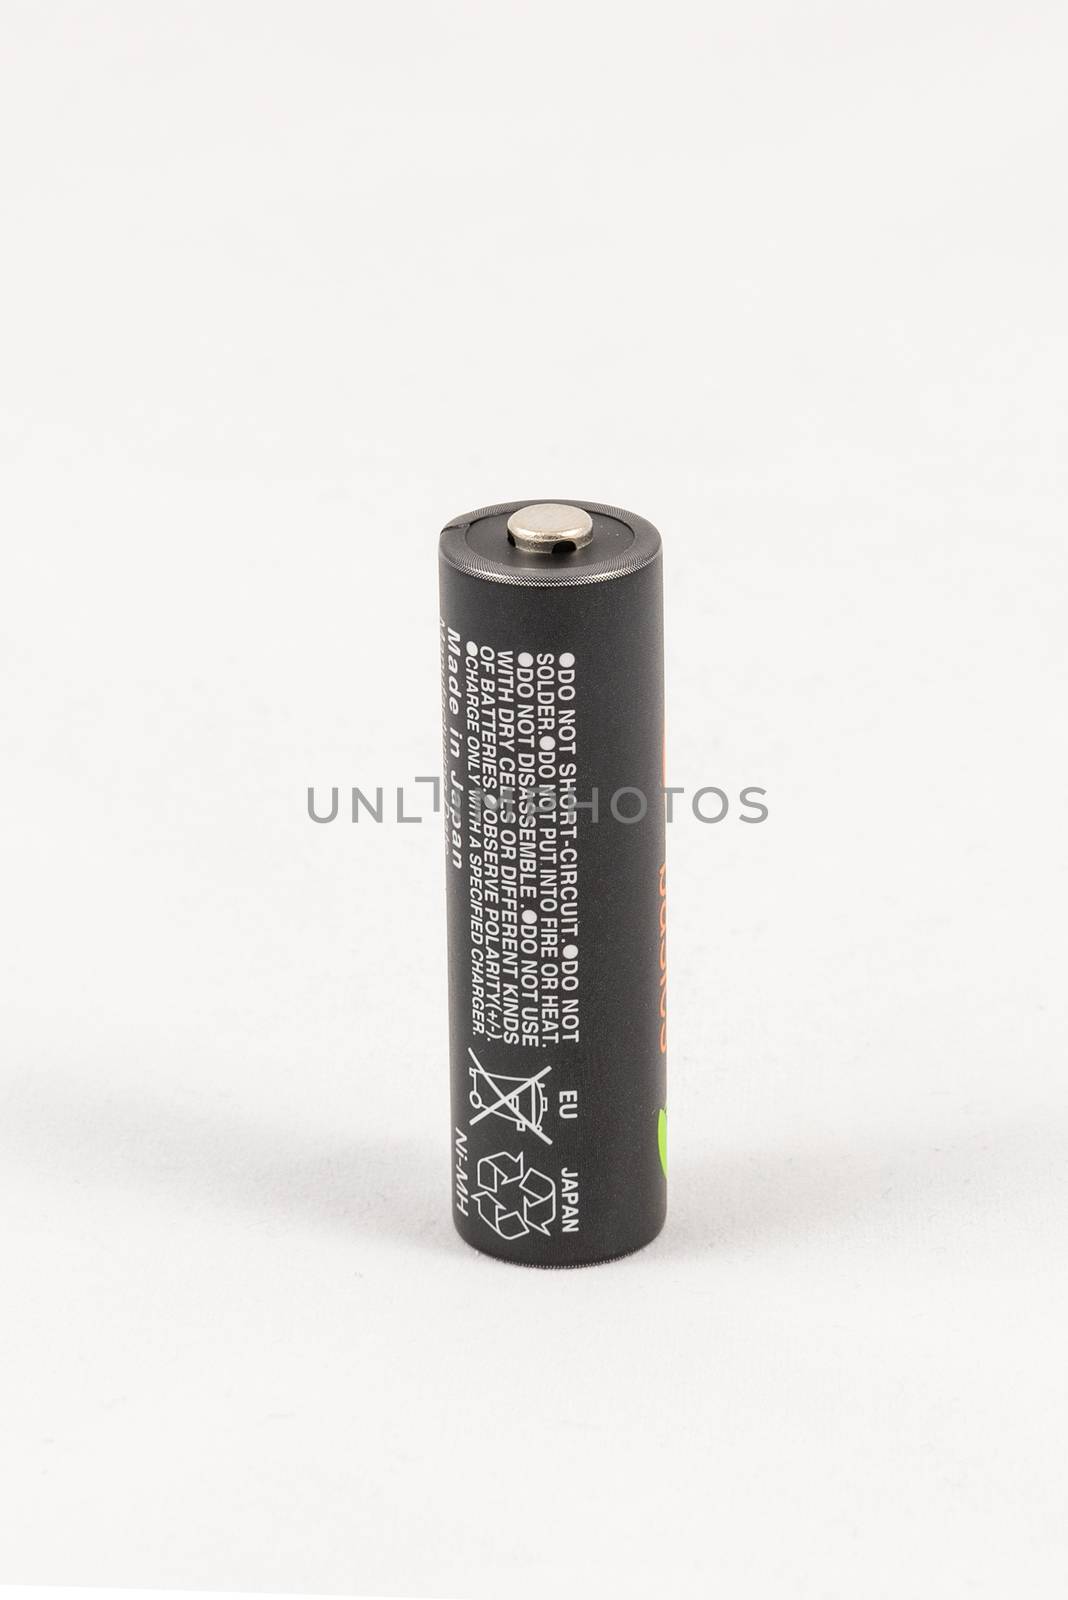 Single unbranded black AA rechargeable battery, isolated on white background